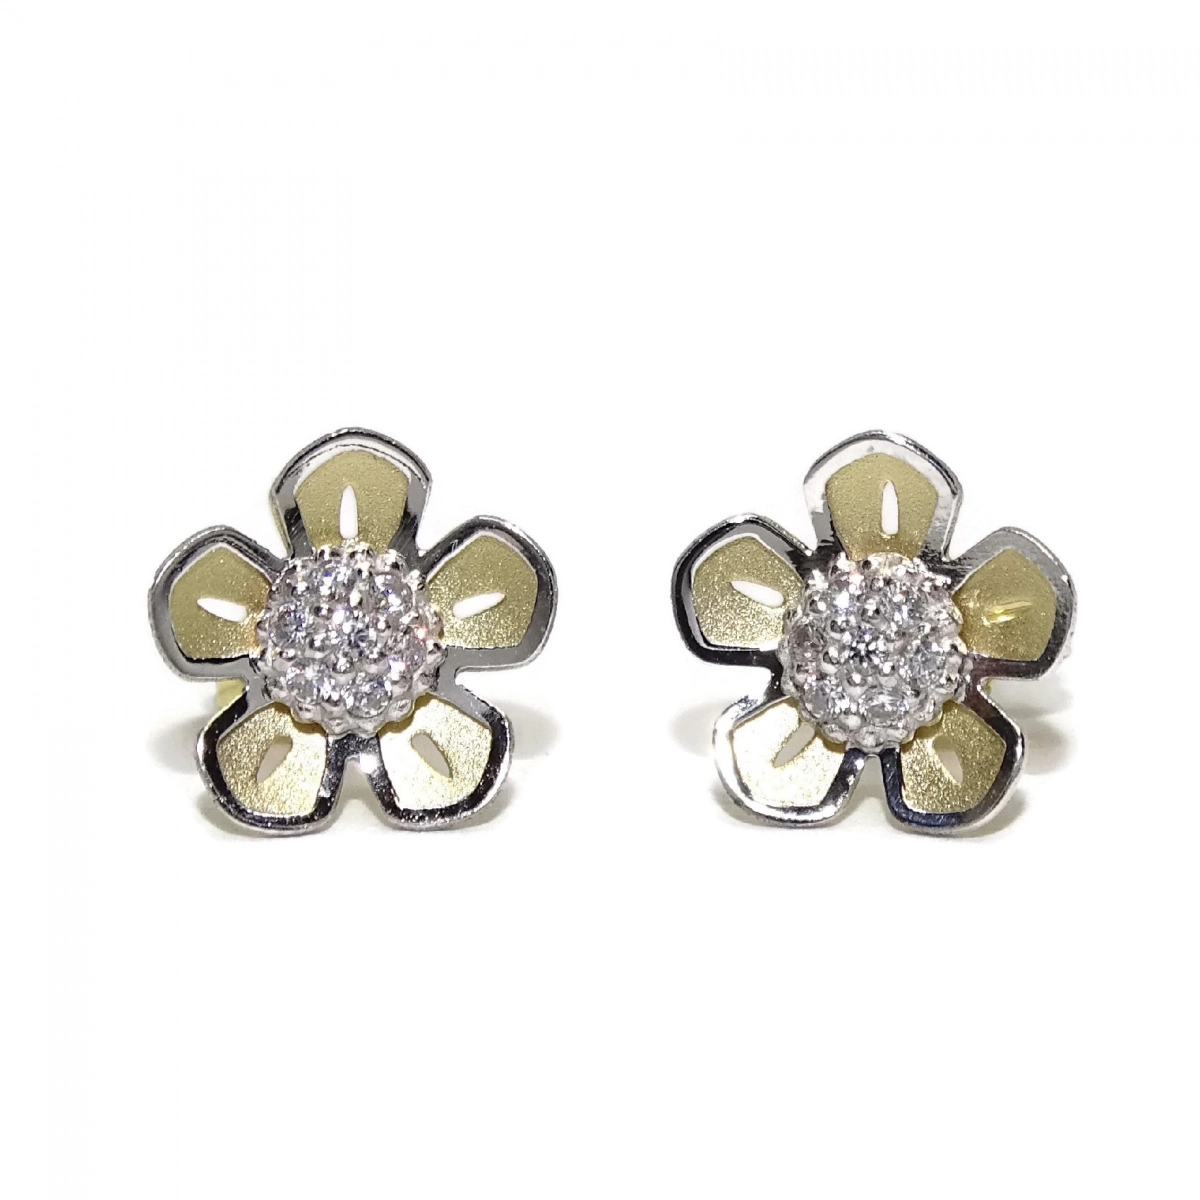 EARRING SPECIAL 'MY FIRST COMMUNION' OF YELLOW GOLD AND WHITE GOLD 18KTES WITH ZIRCONS. NEVER SAY NEVER